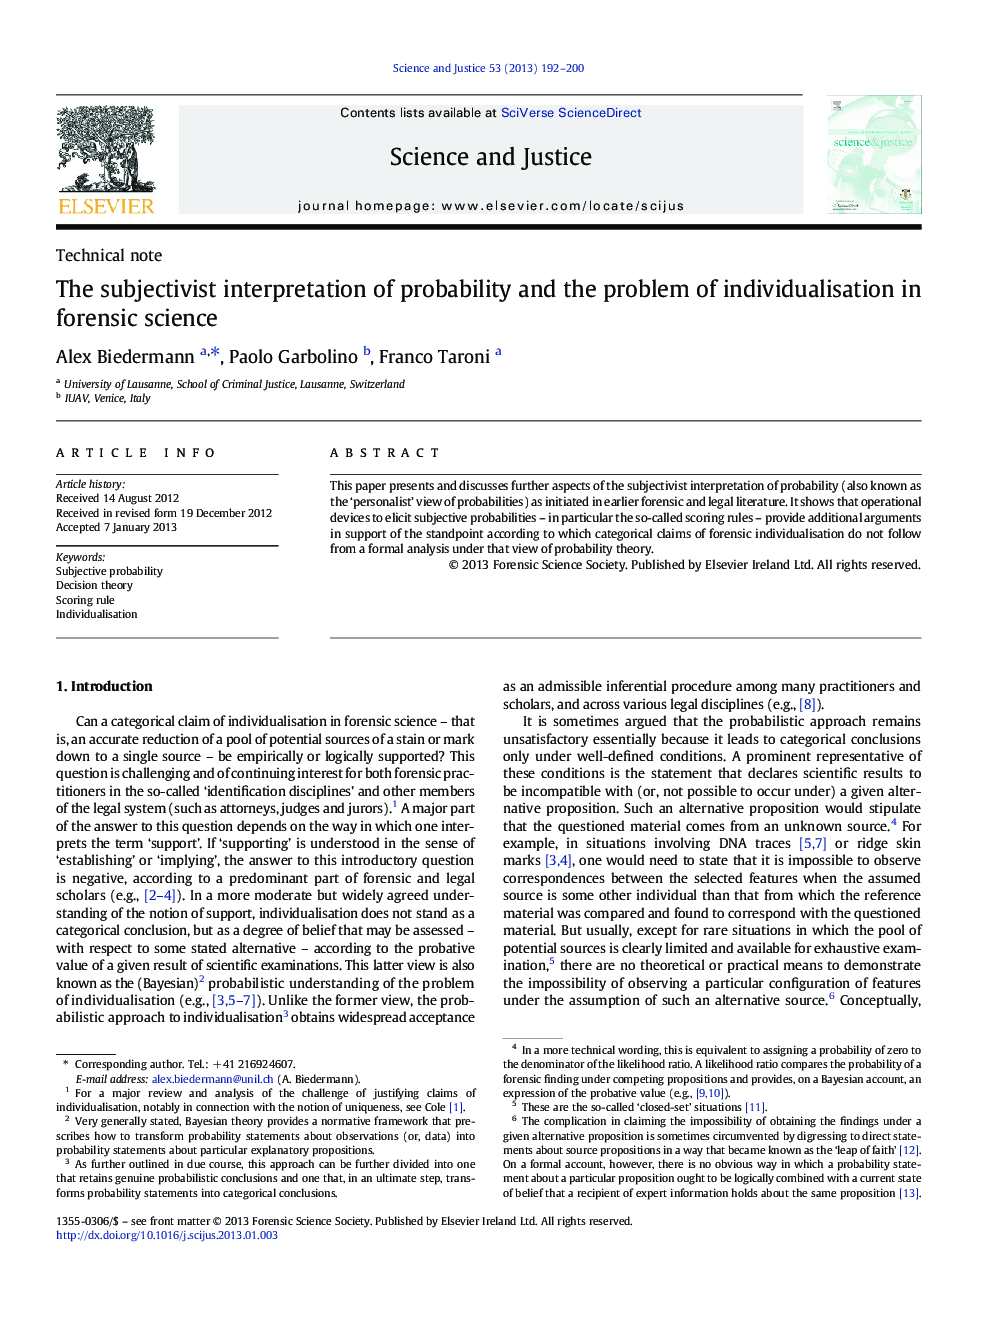 The subjectivist interpretation of probability and the problem of individualisation in forensic science